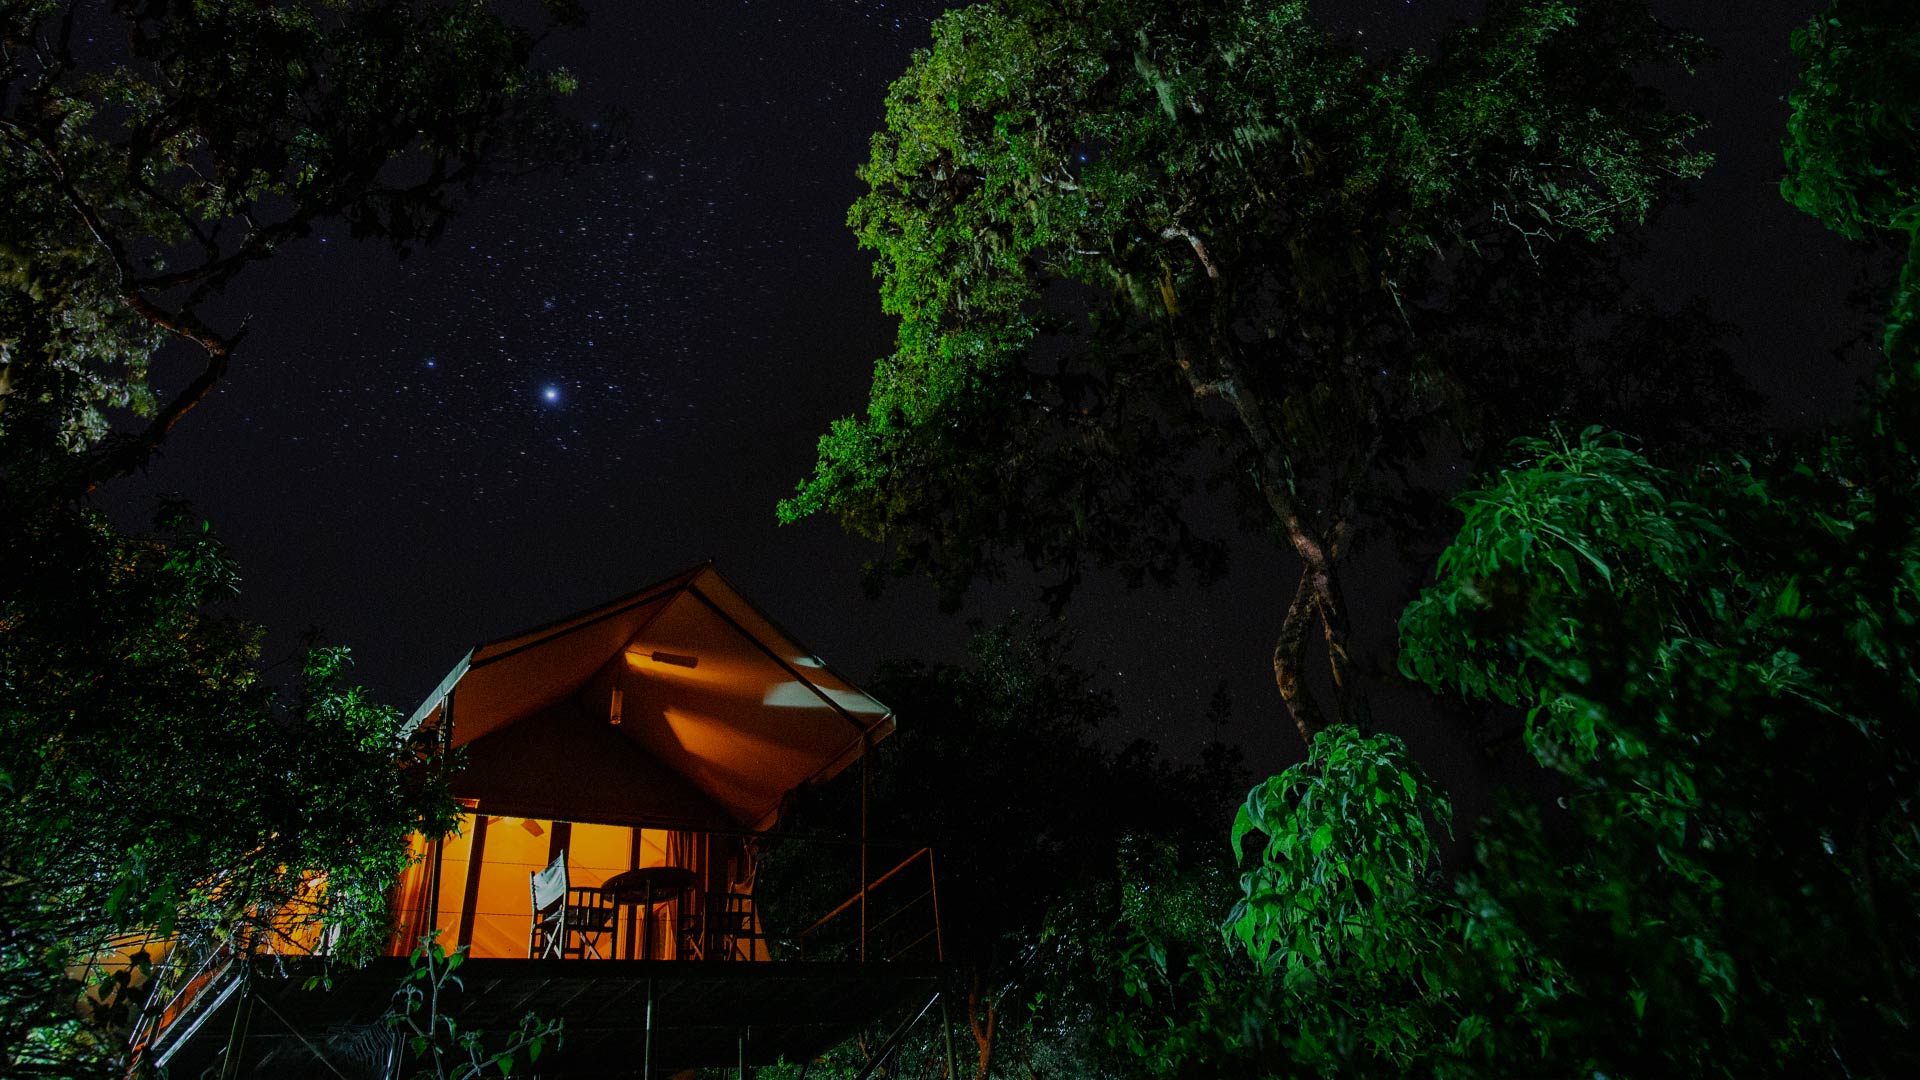 Sleeping under the stars in the Galapagos Islands